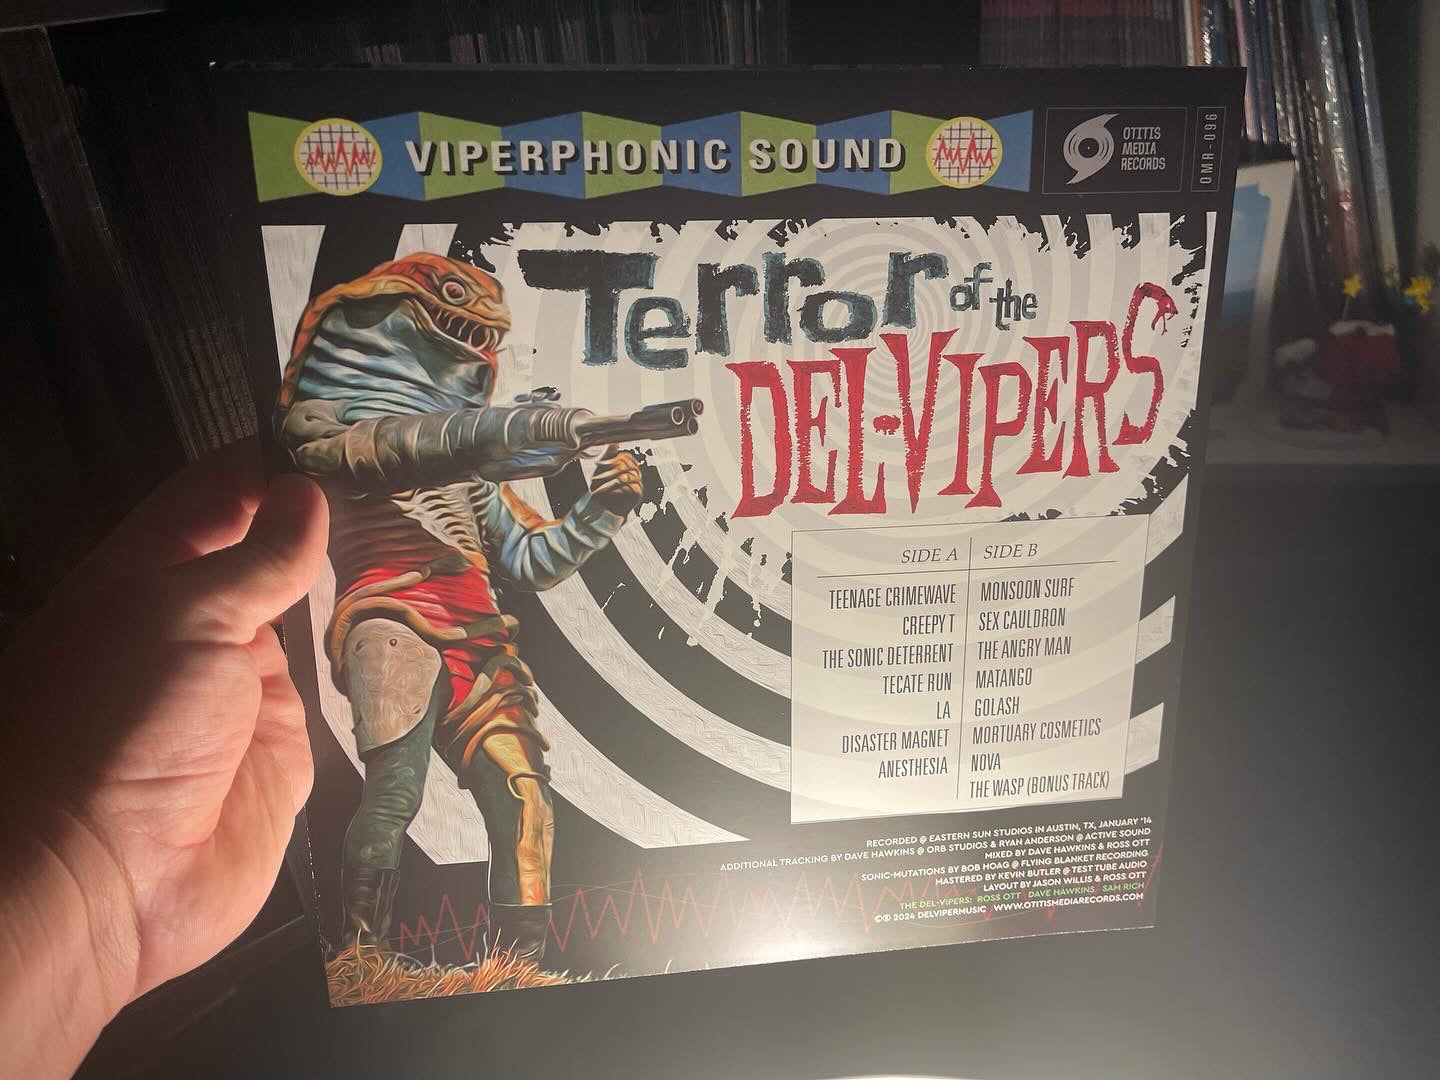 OMR-096 The Del Vipers “Terror of The Del Vipers” SUPER LIMITED HAND MADE VARIANT (Gobstopper design) Limited to 10 pressed! ***Non Wax Mage￼